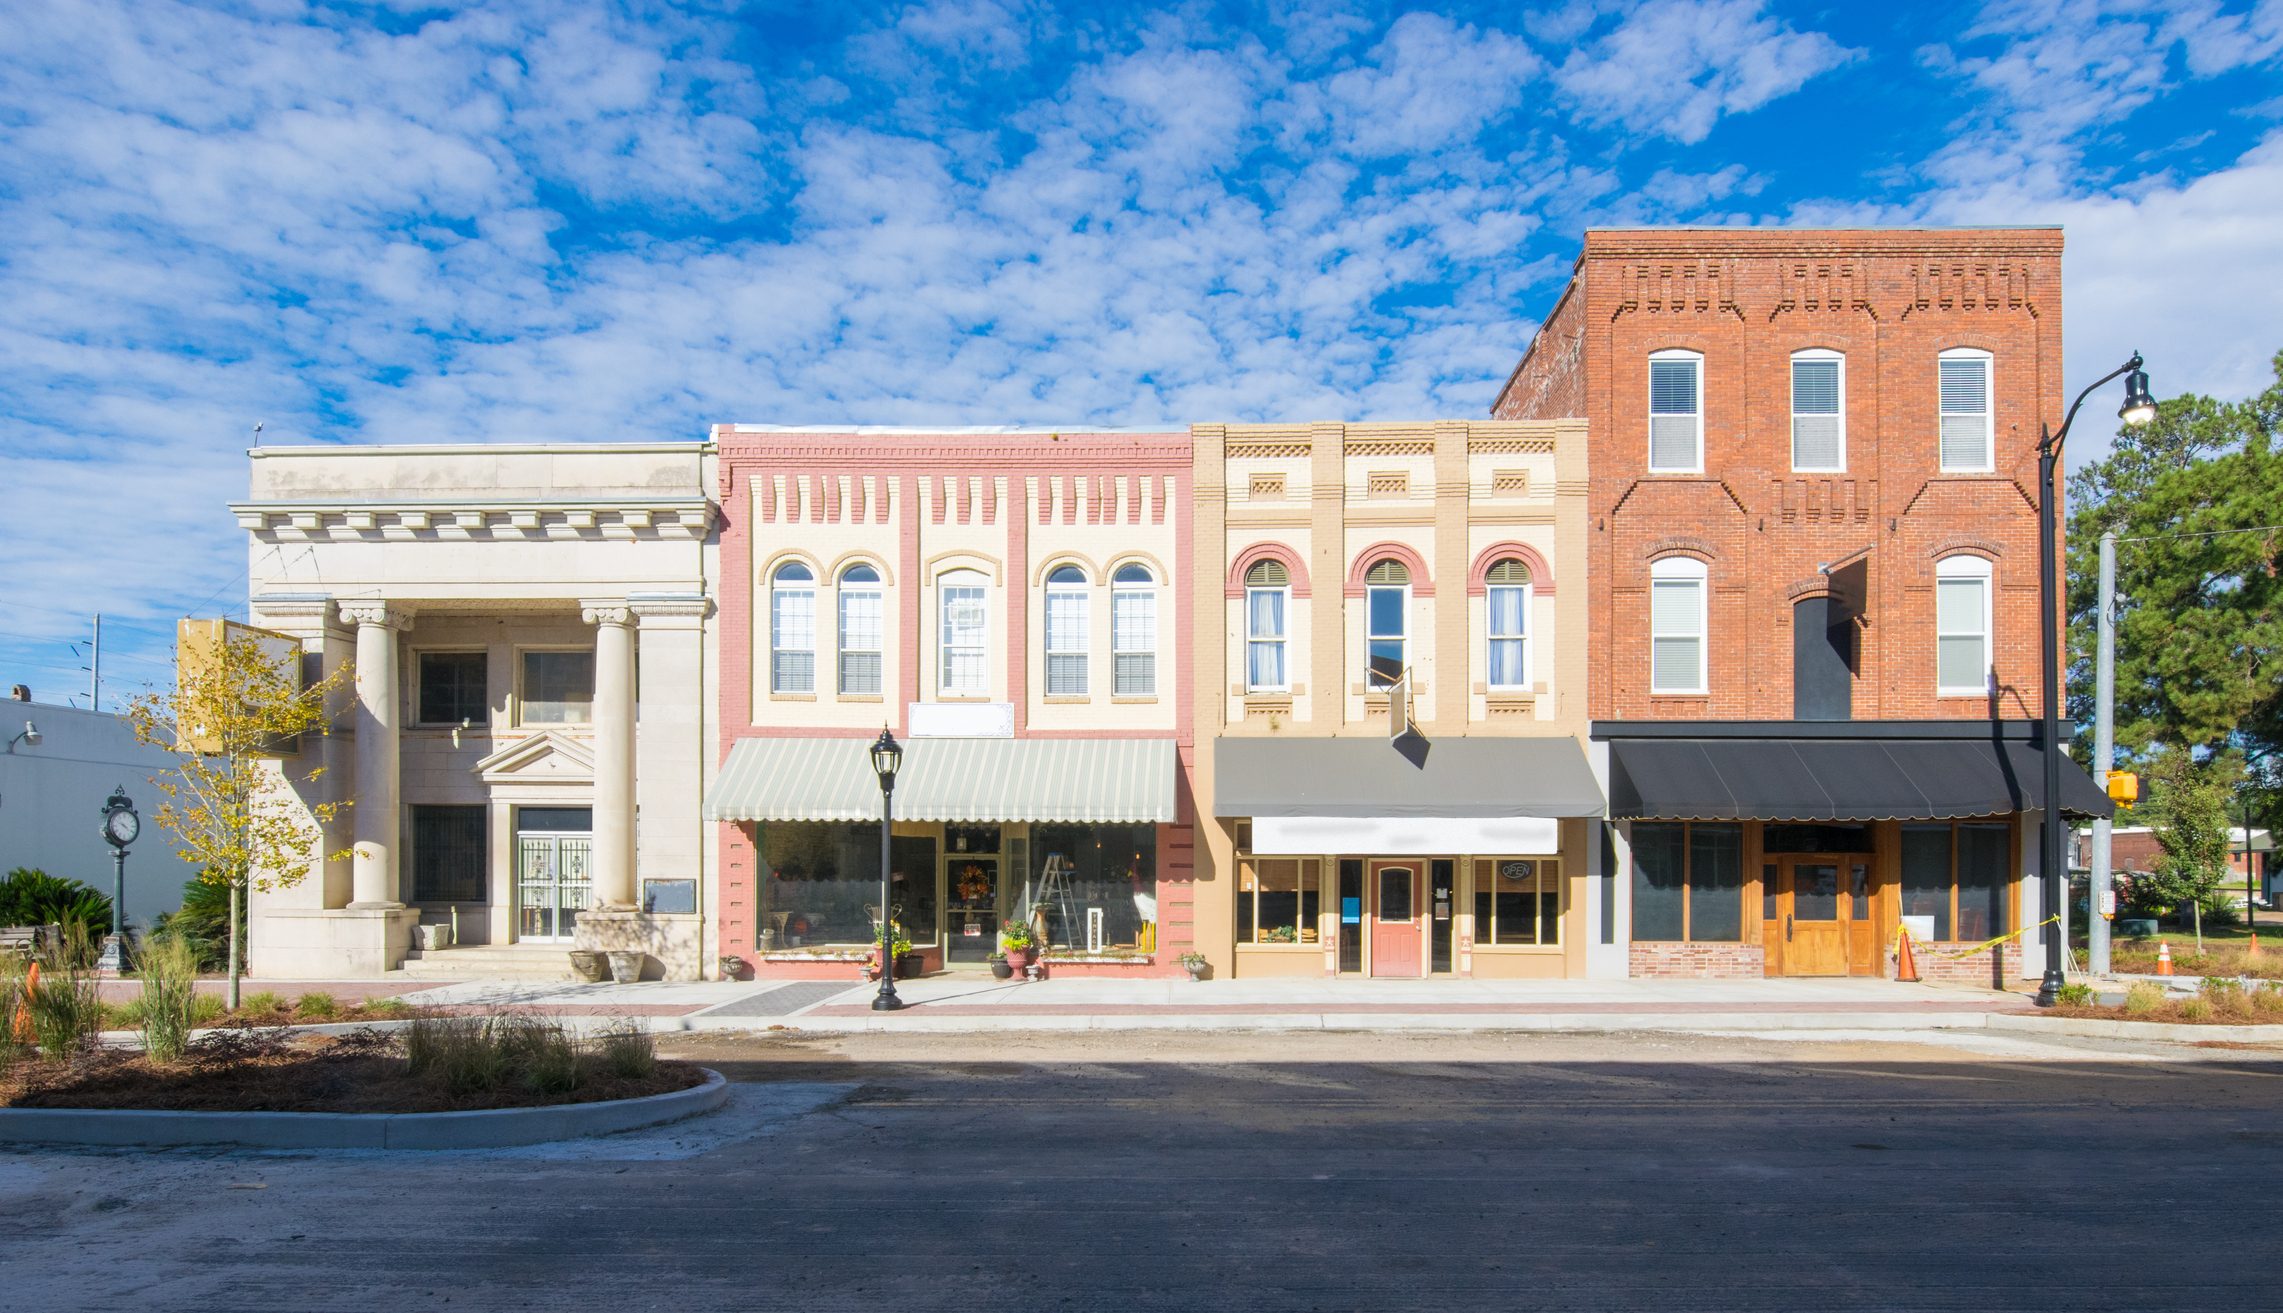 Small Towns with Beautiful Architecture